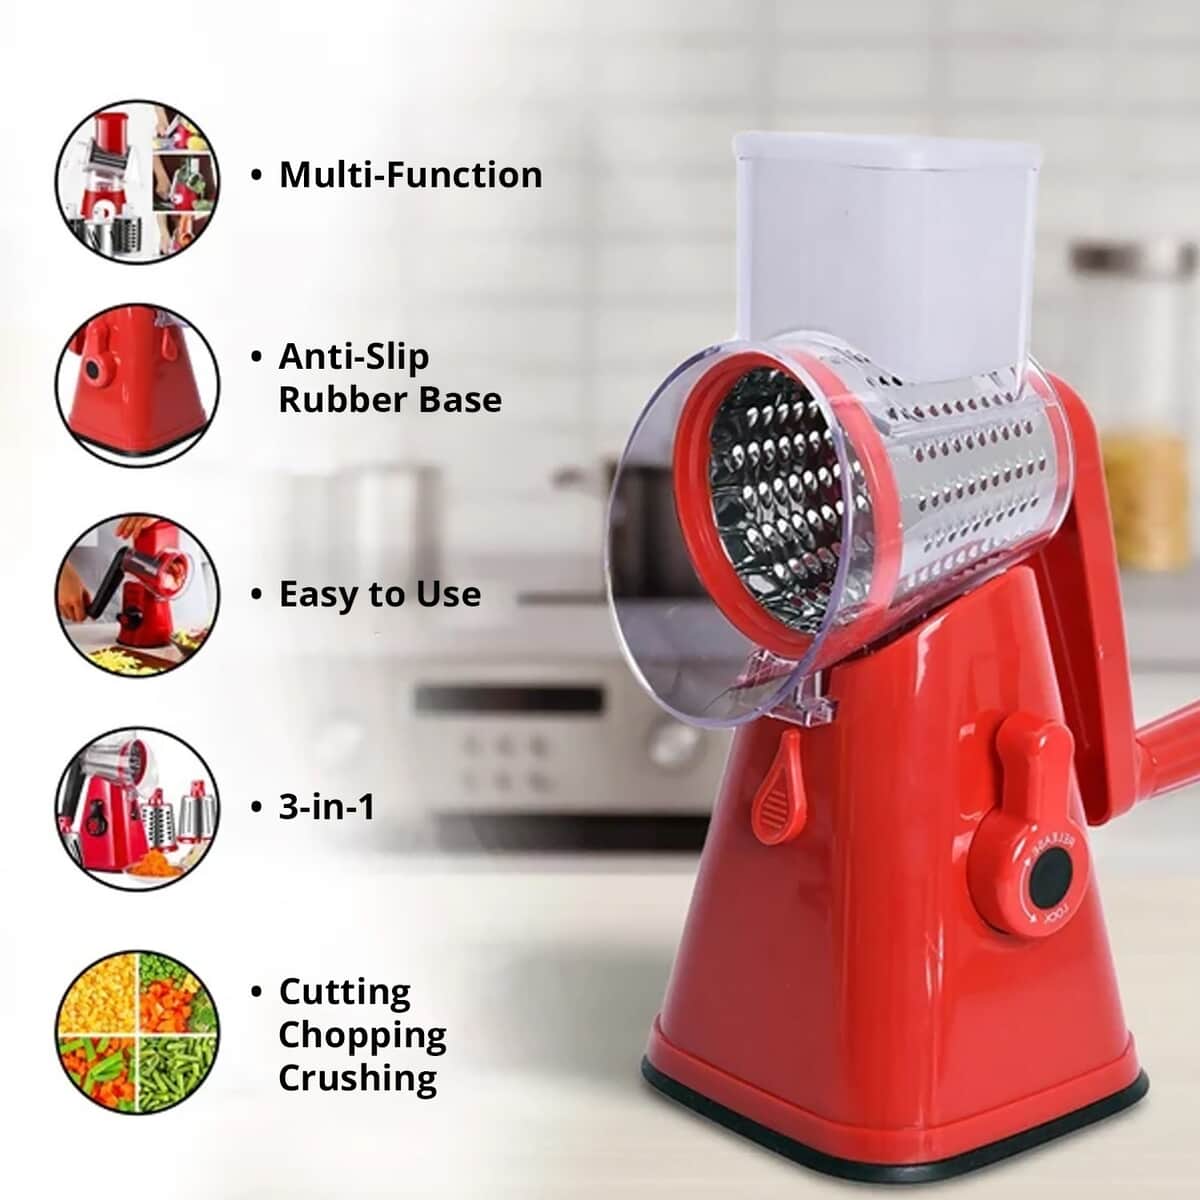 3-in-1 Rotary Cheese Grater, Vegetable and Fruit Slicer with Slicing, Shredding and Grating Blades image number 2